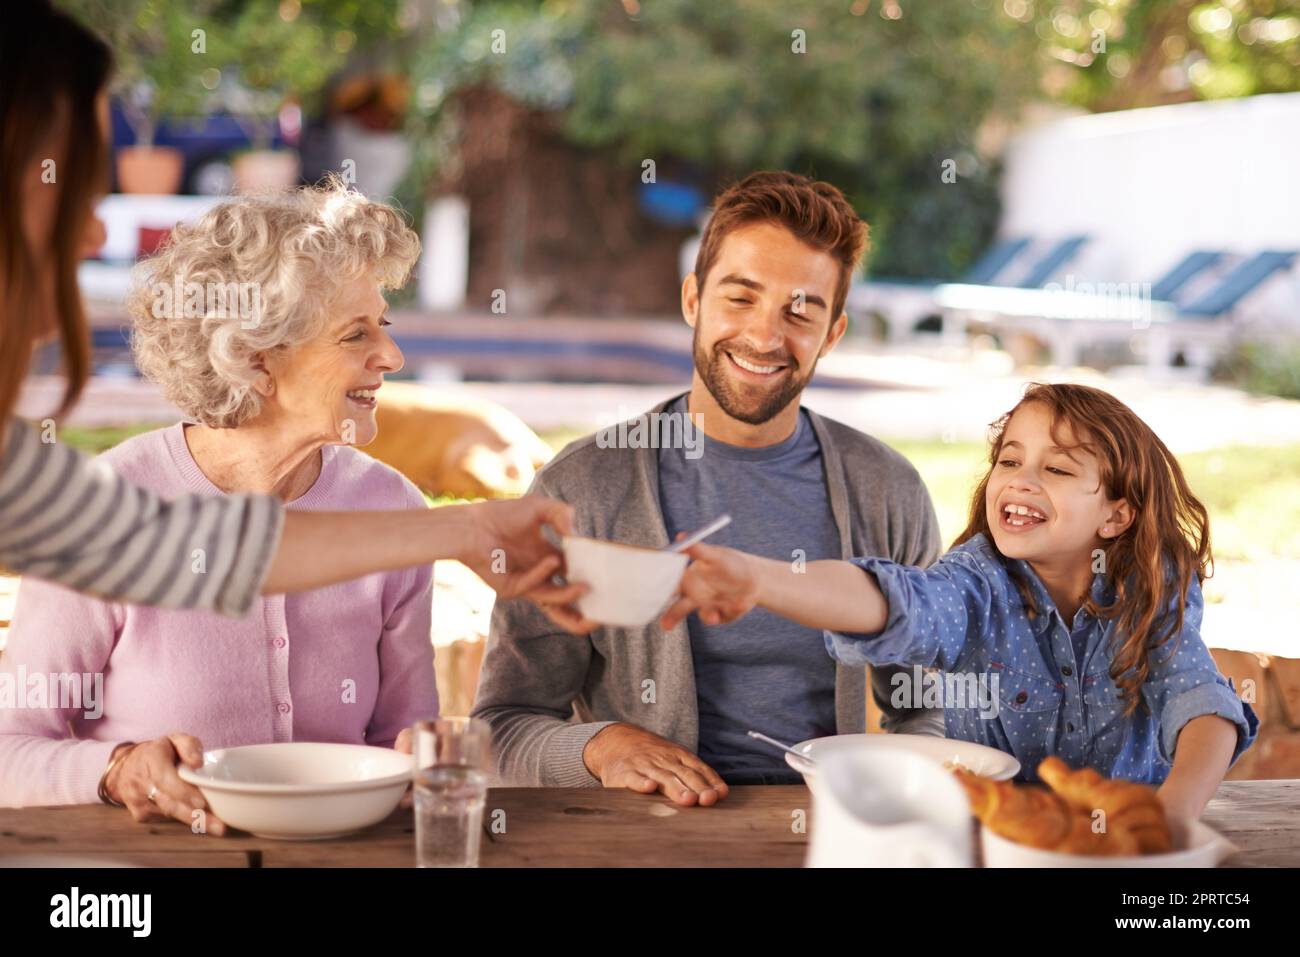 Sharing a scrumptious meal. a family having breakfast together outside. Stock Photo